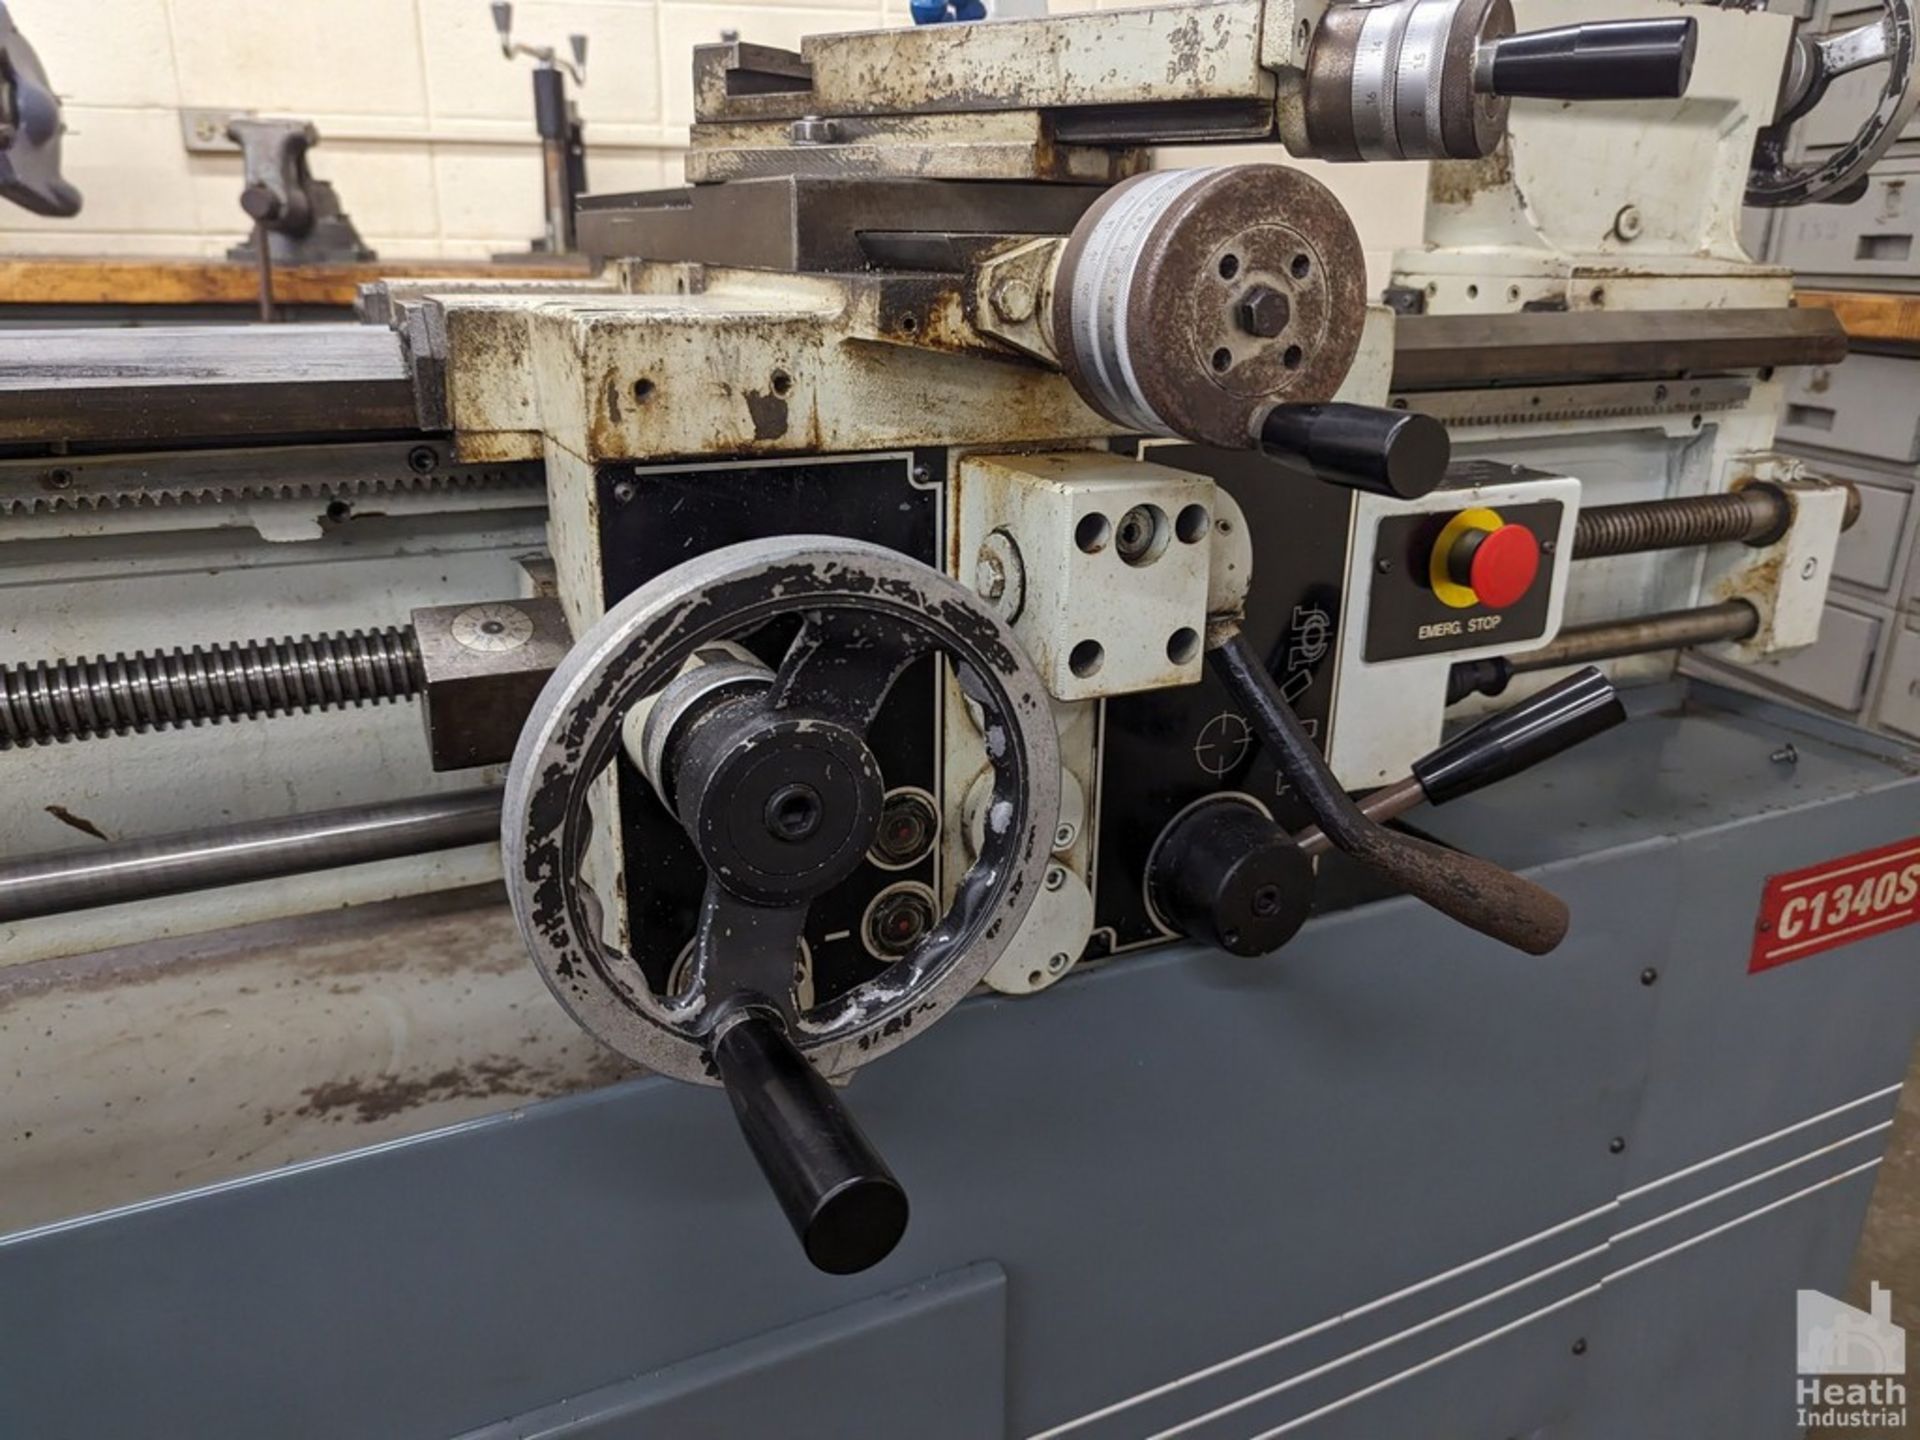 CLAUSING-METOSA 13"X40" MODEL 1340S TOOLROOM LATHE, S/N 41550, 2500 SPINDLE RPM, WITH TAPER - Image 7 of 8